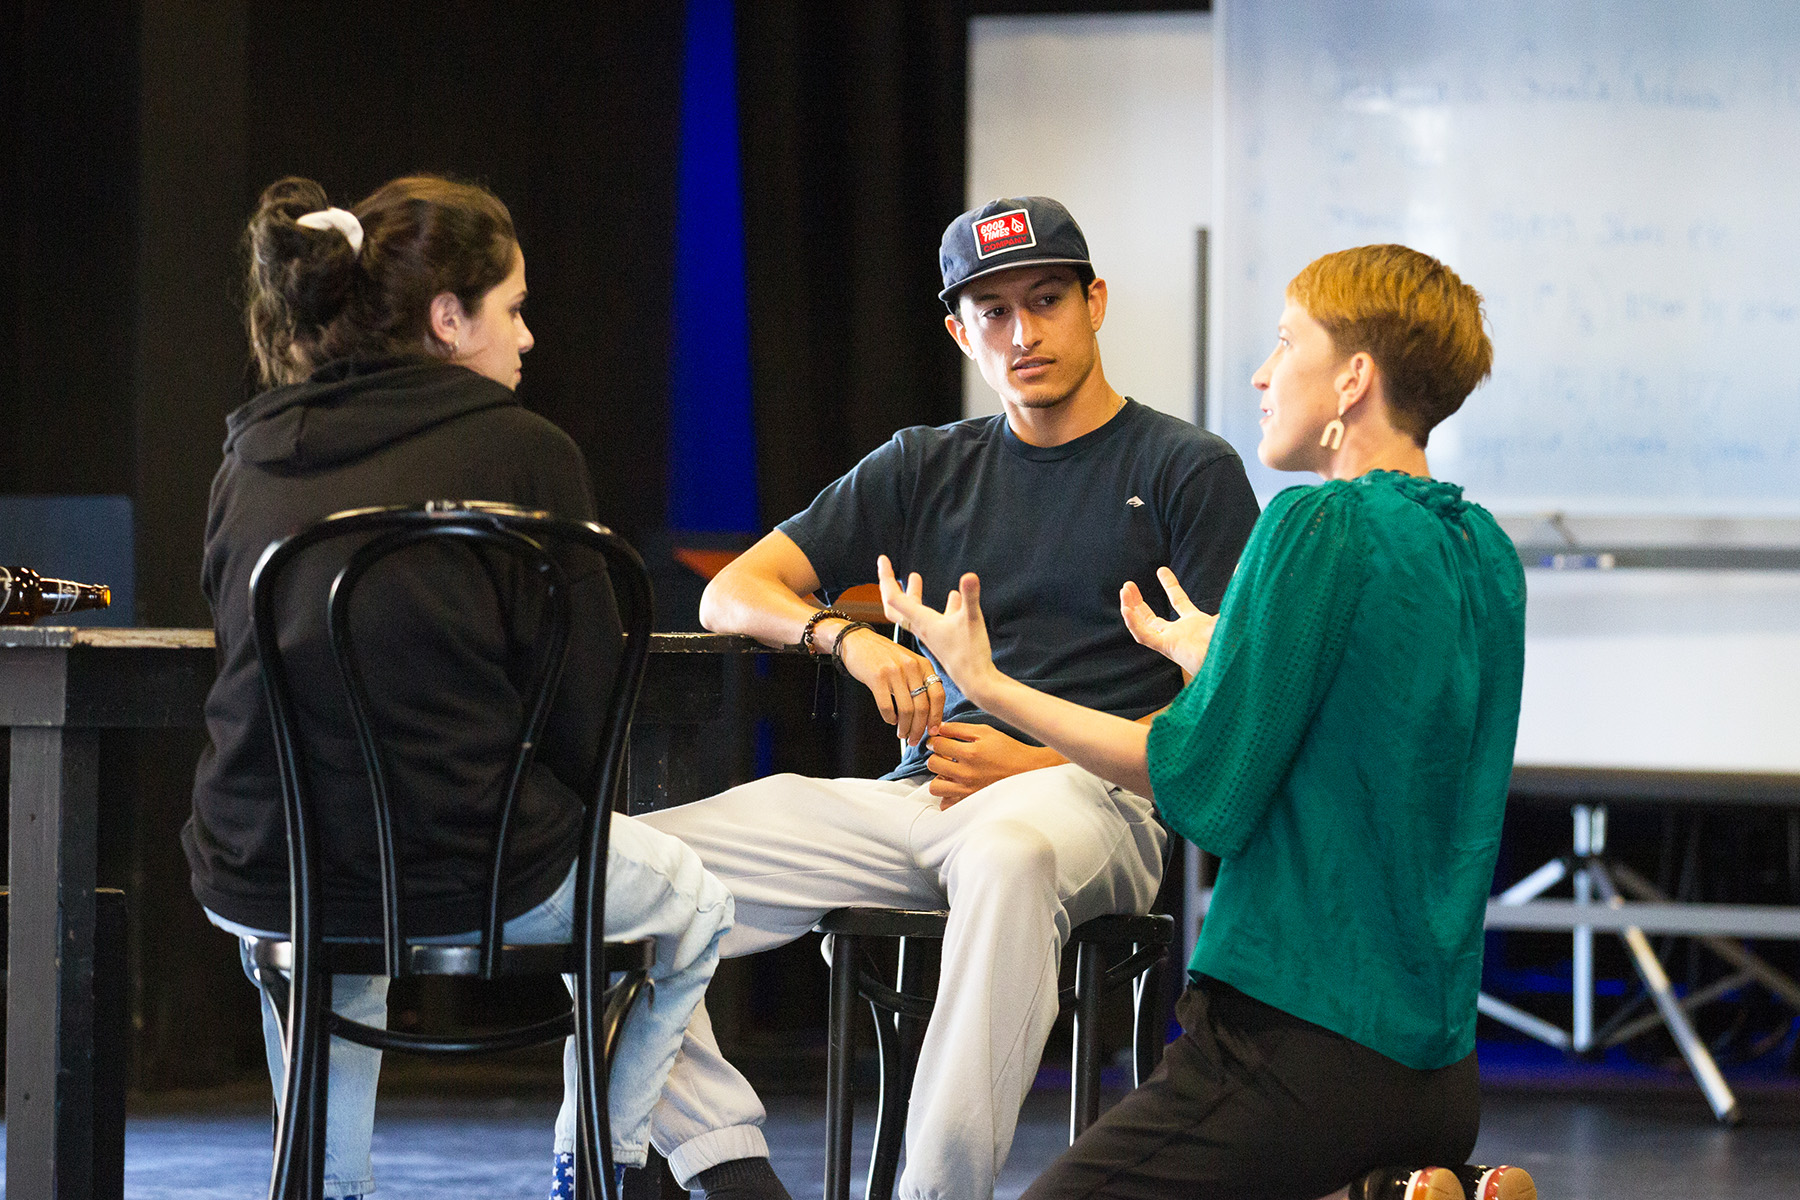 Professor instructs students in theatre space